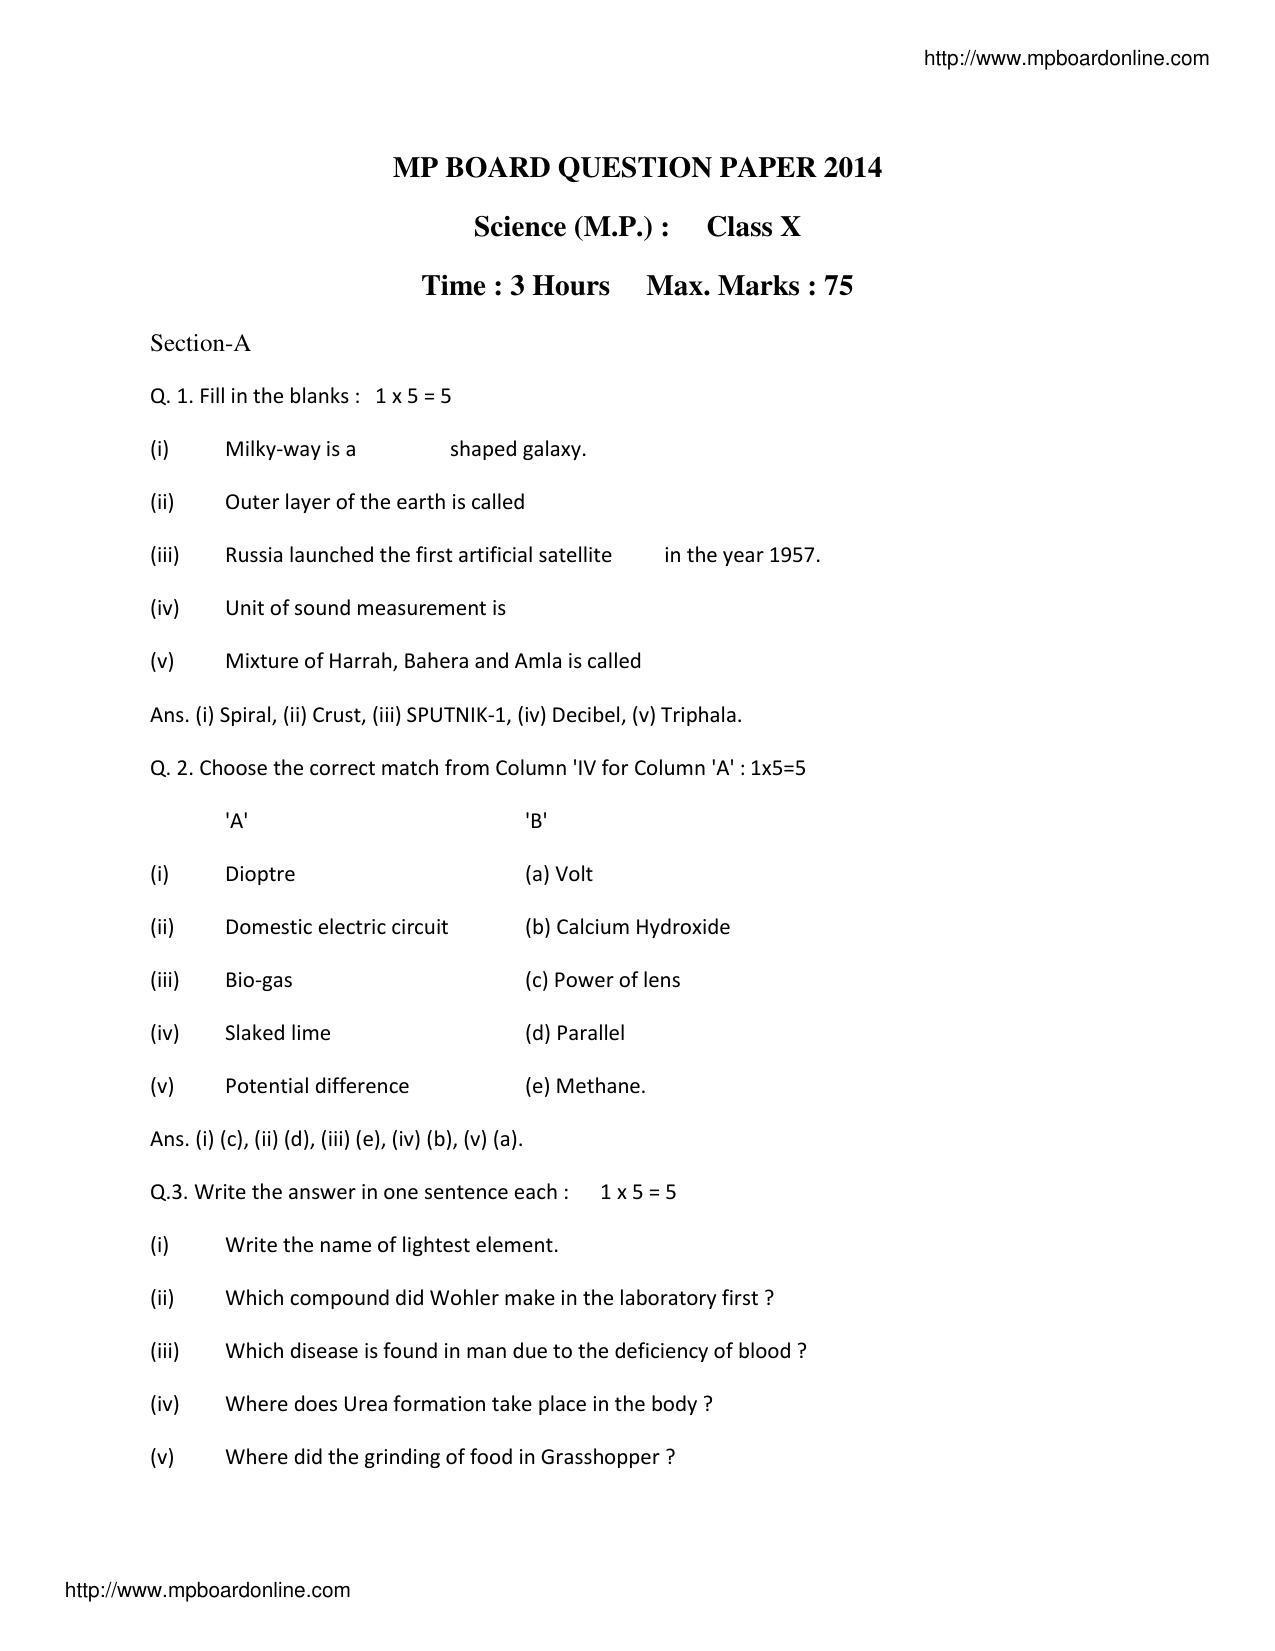 MP Board Class 10 Science (English Medium) 2014 Question Paper - Page 1